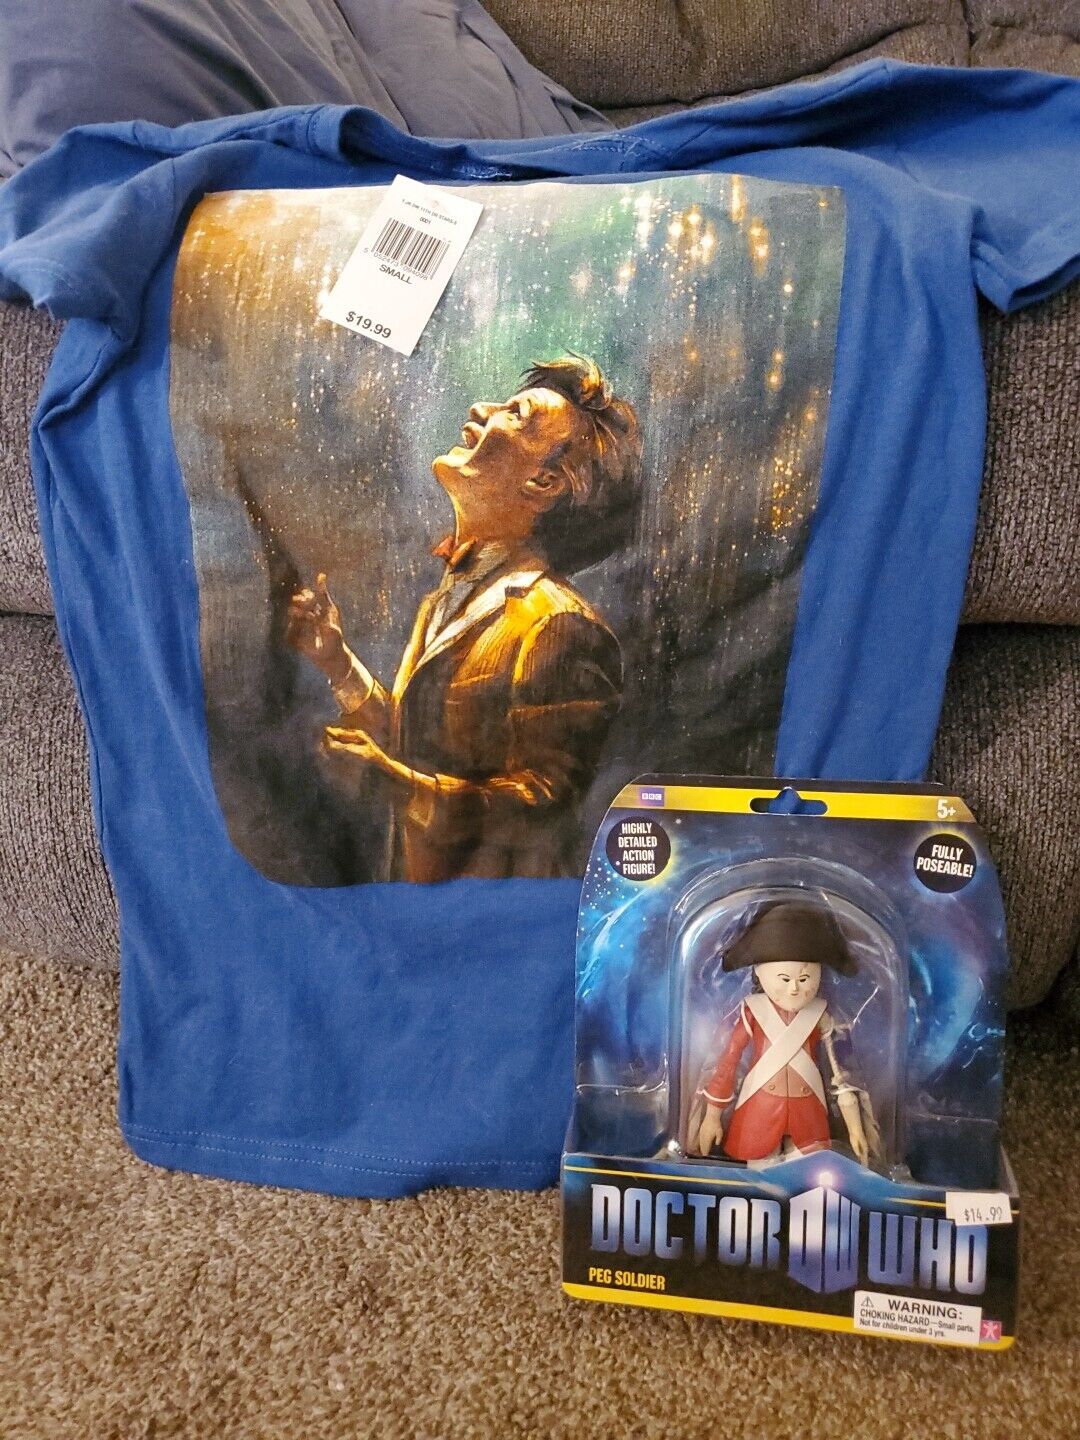 DOCTOR WHO BUNDLE 11th DR Shirt LS New With Tags and Peg Soldier 